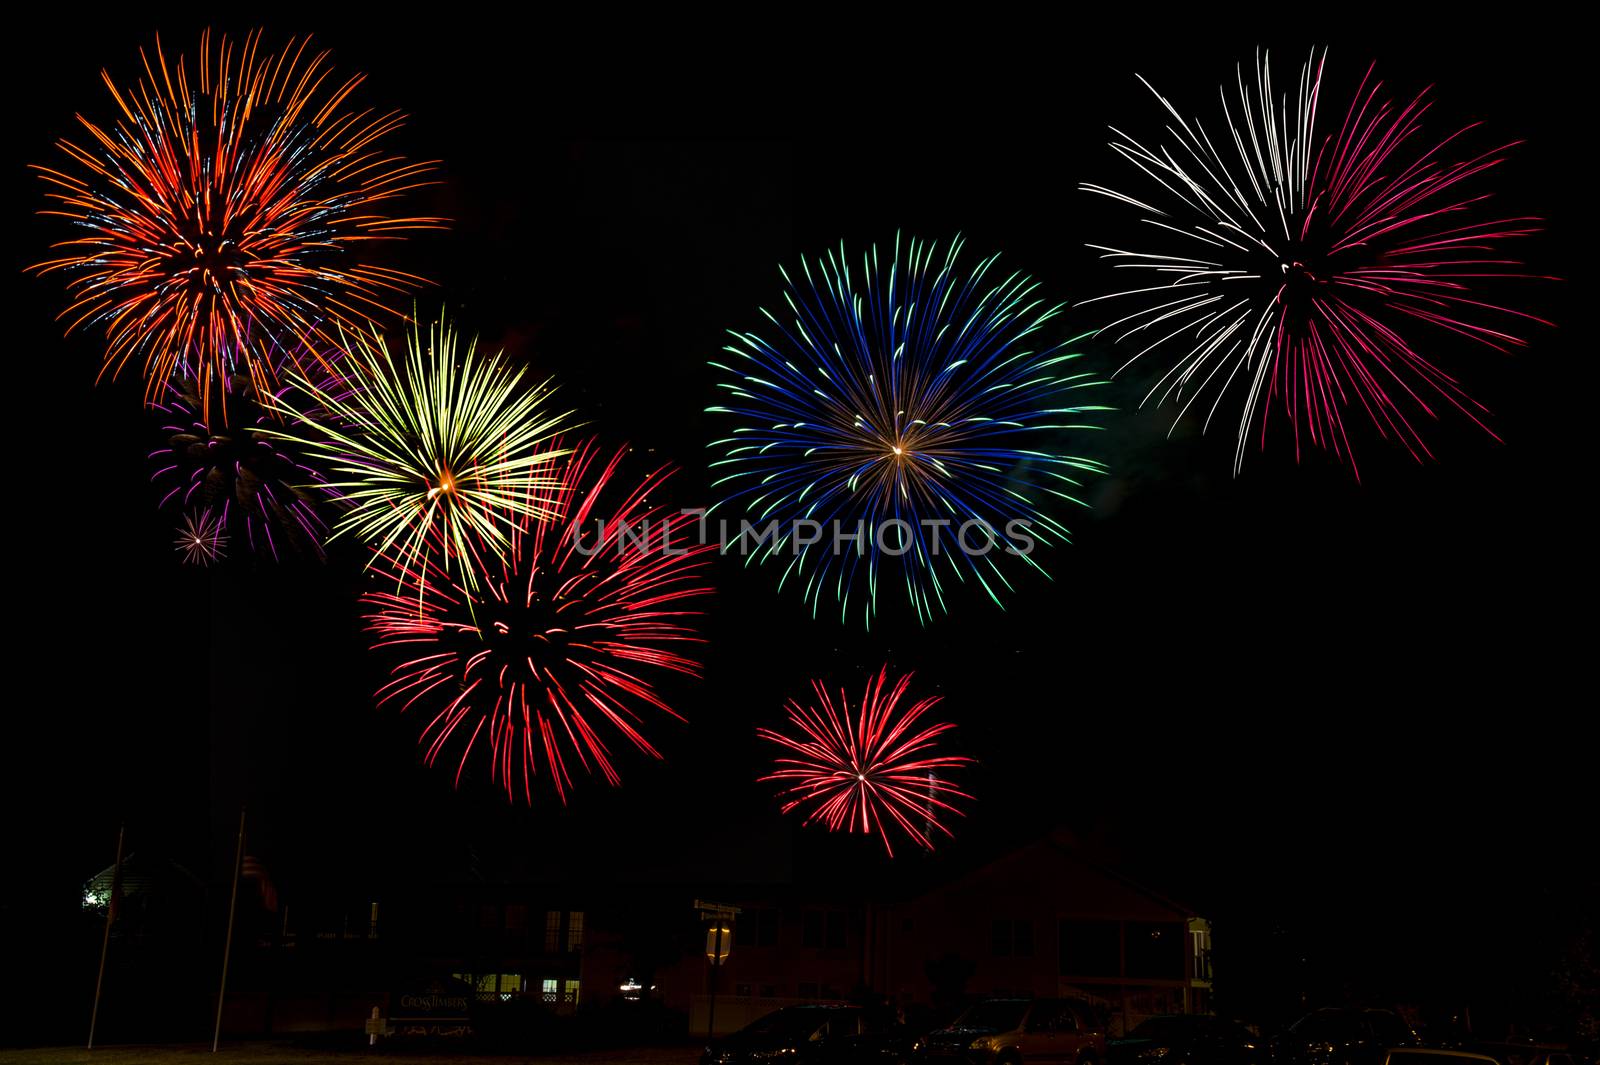 A display of fireworks for any celebration